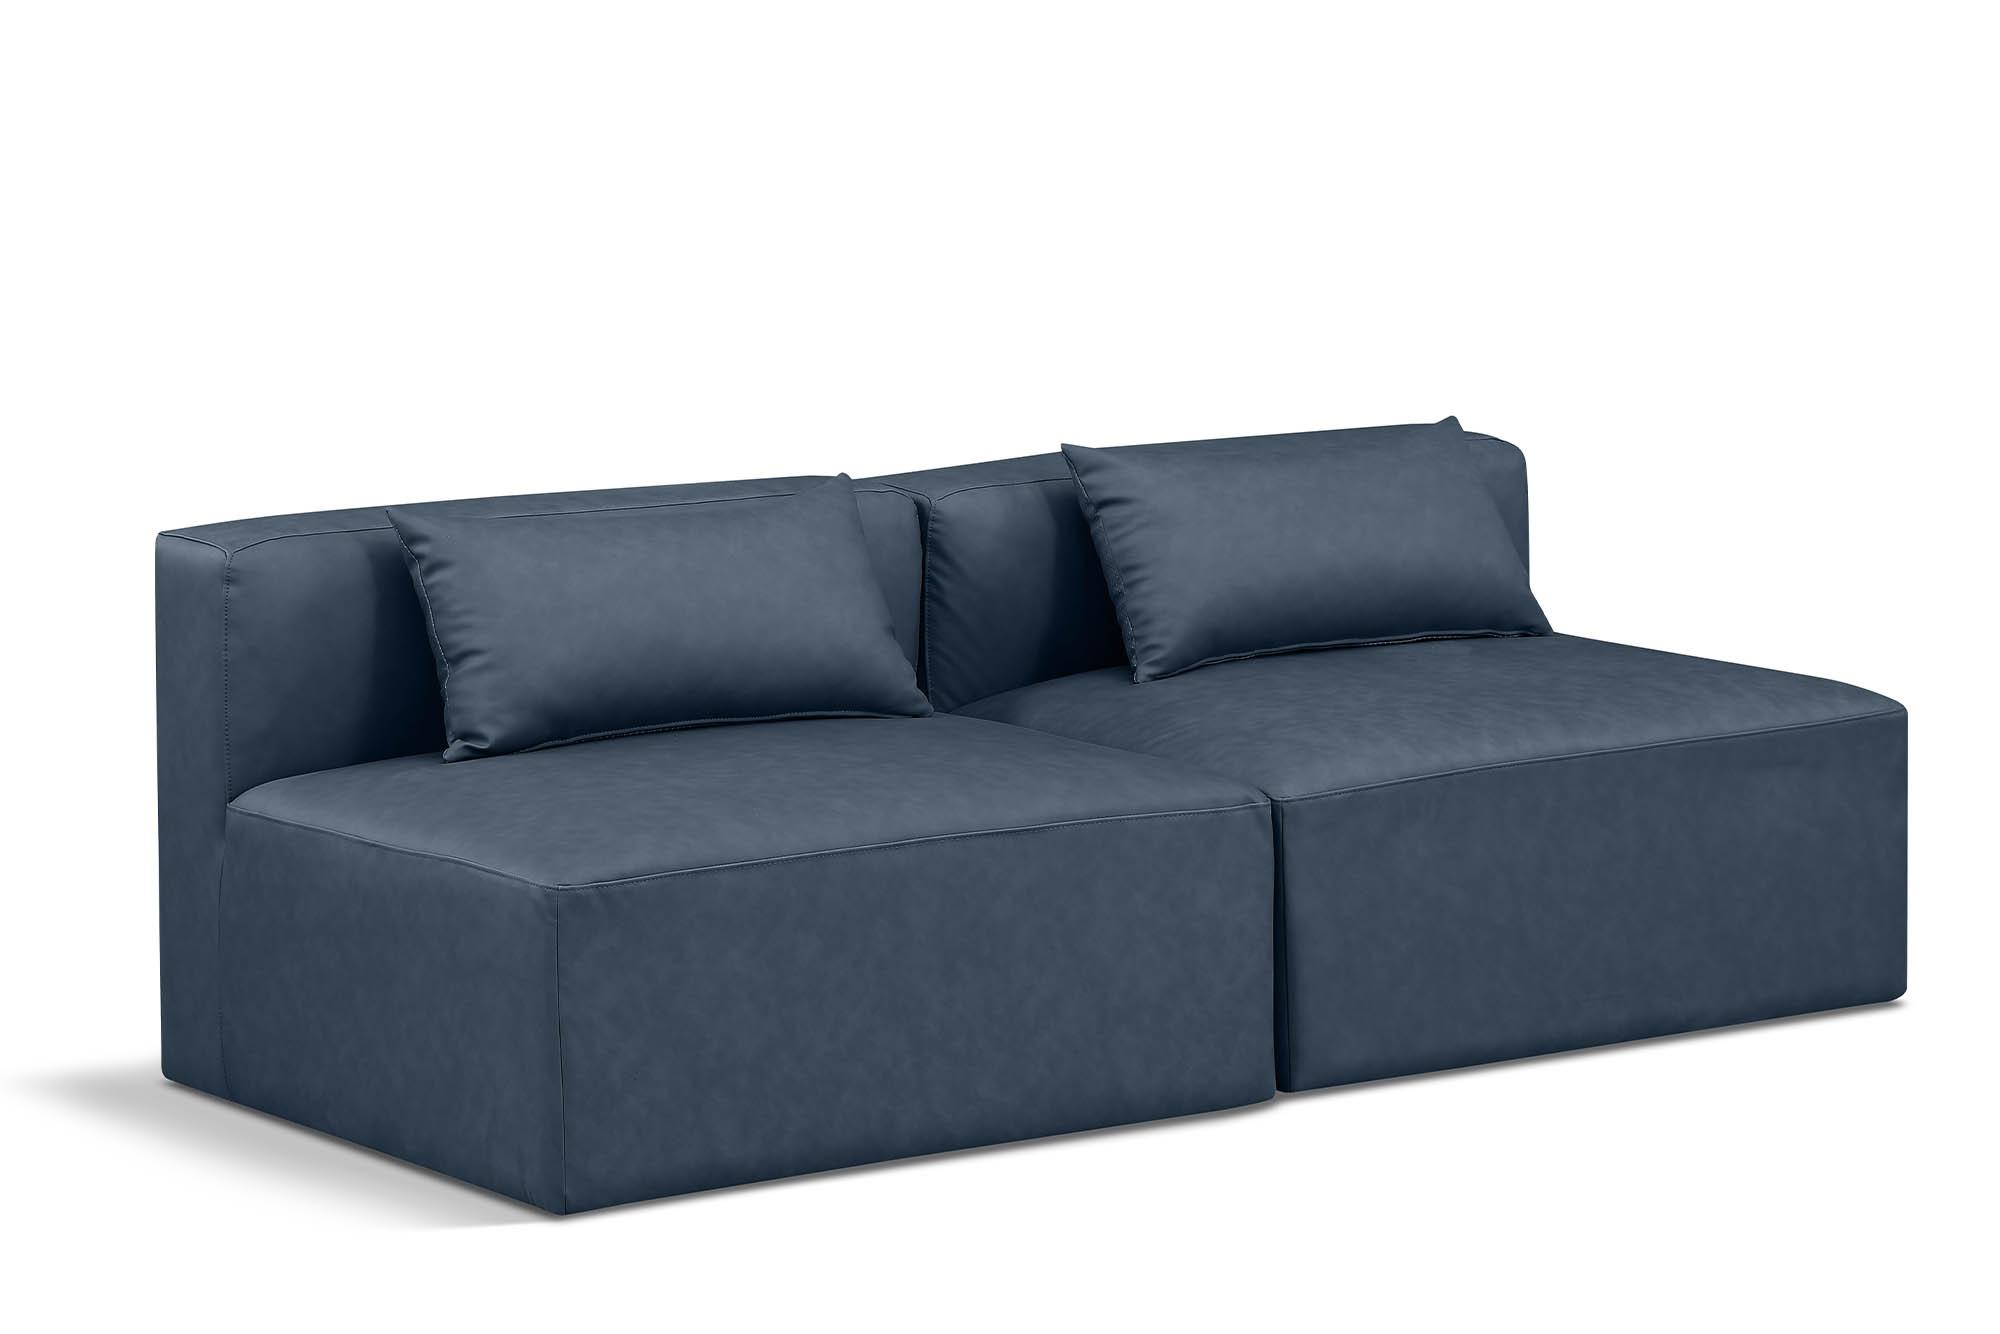 Contemporary, Modern Modular Sofa CUBE 668Navy-S72A 668Navy-S72A in Navy Faux Leather